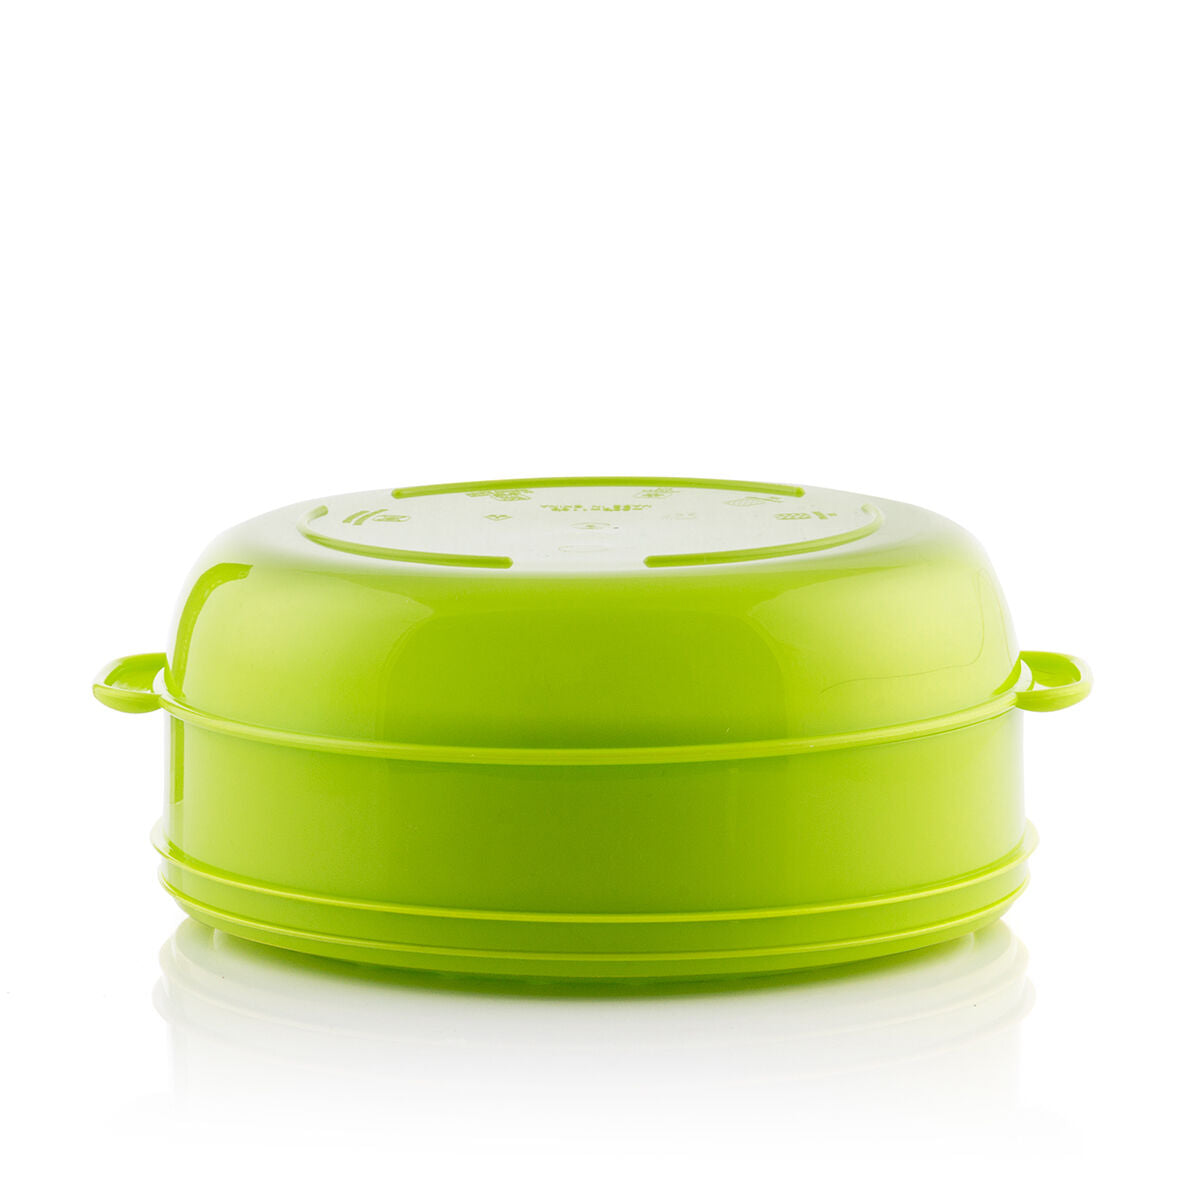 Microwave double vegetable steamer